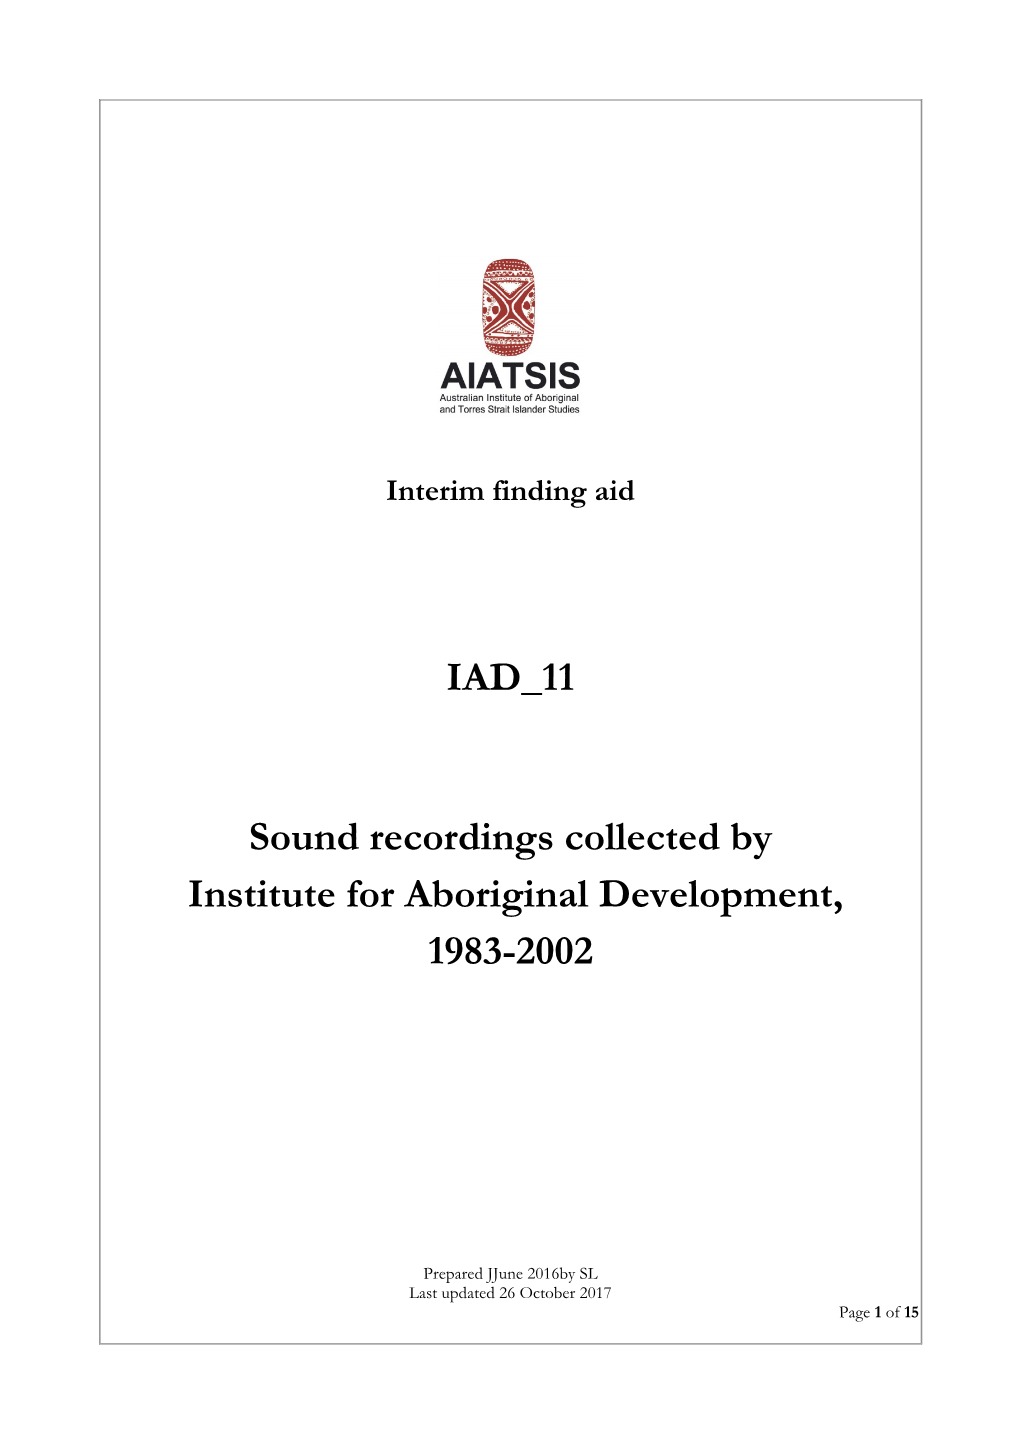 IAD 11 Sound Recordings Collected by Institute for Aboriginal Development, 1983-2002